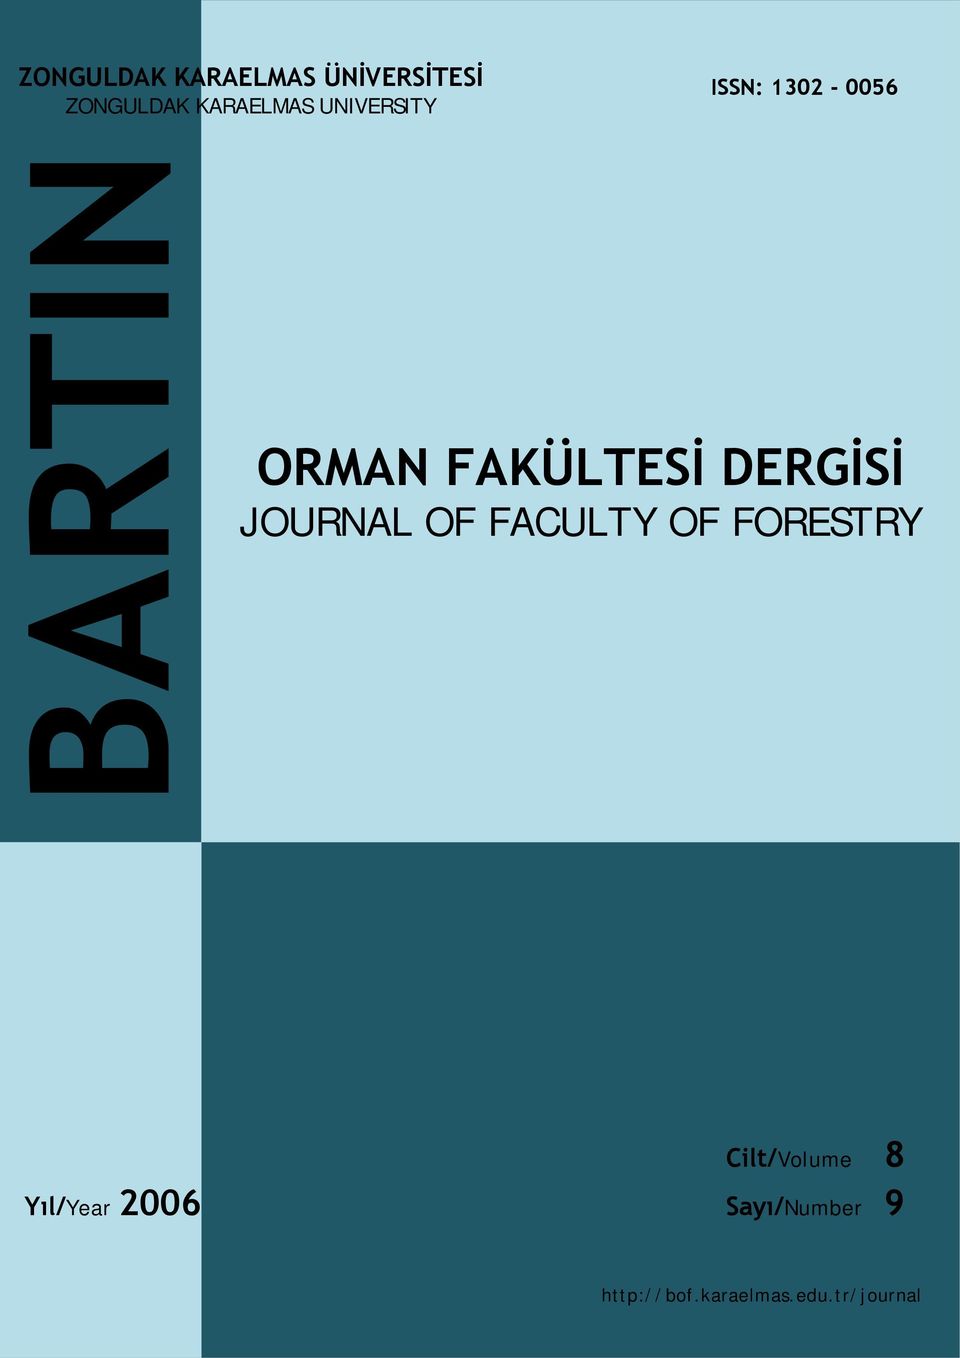 JOURNAL OF FACULTY OF FORESTRY Cilt/Volume 8